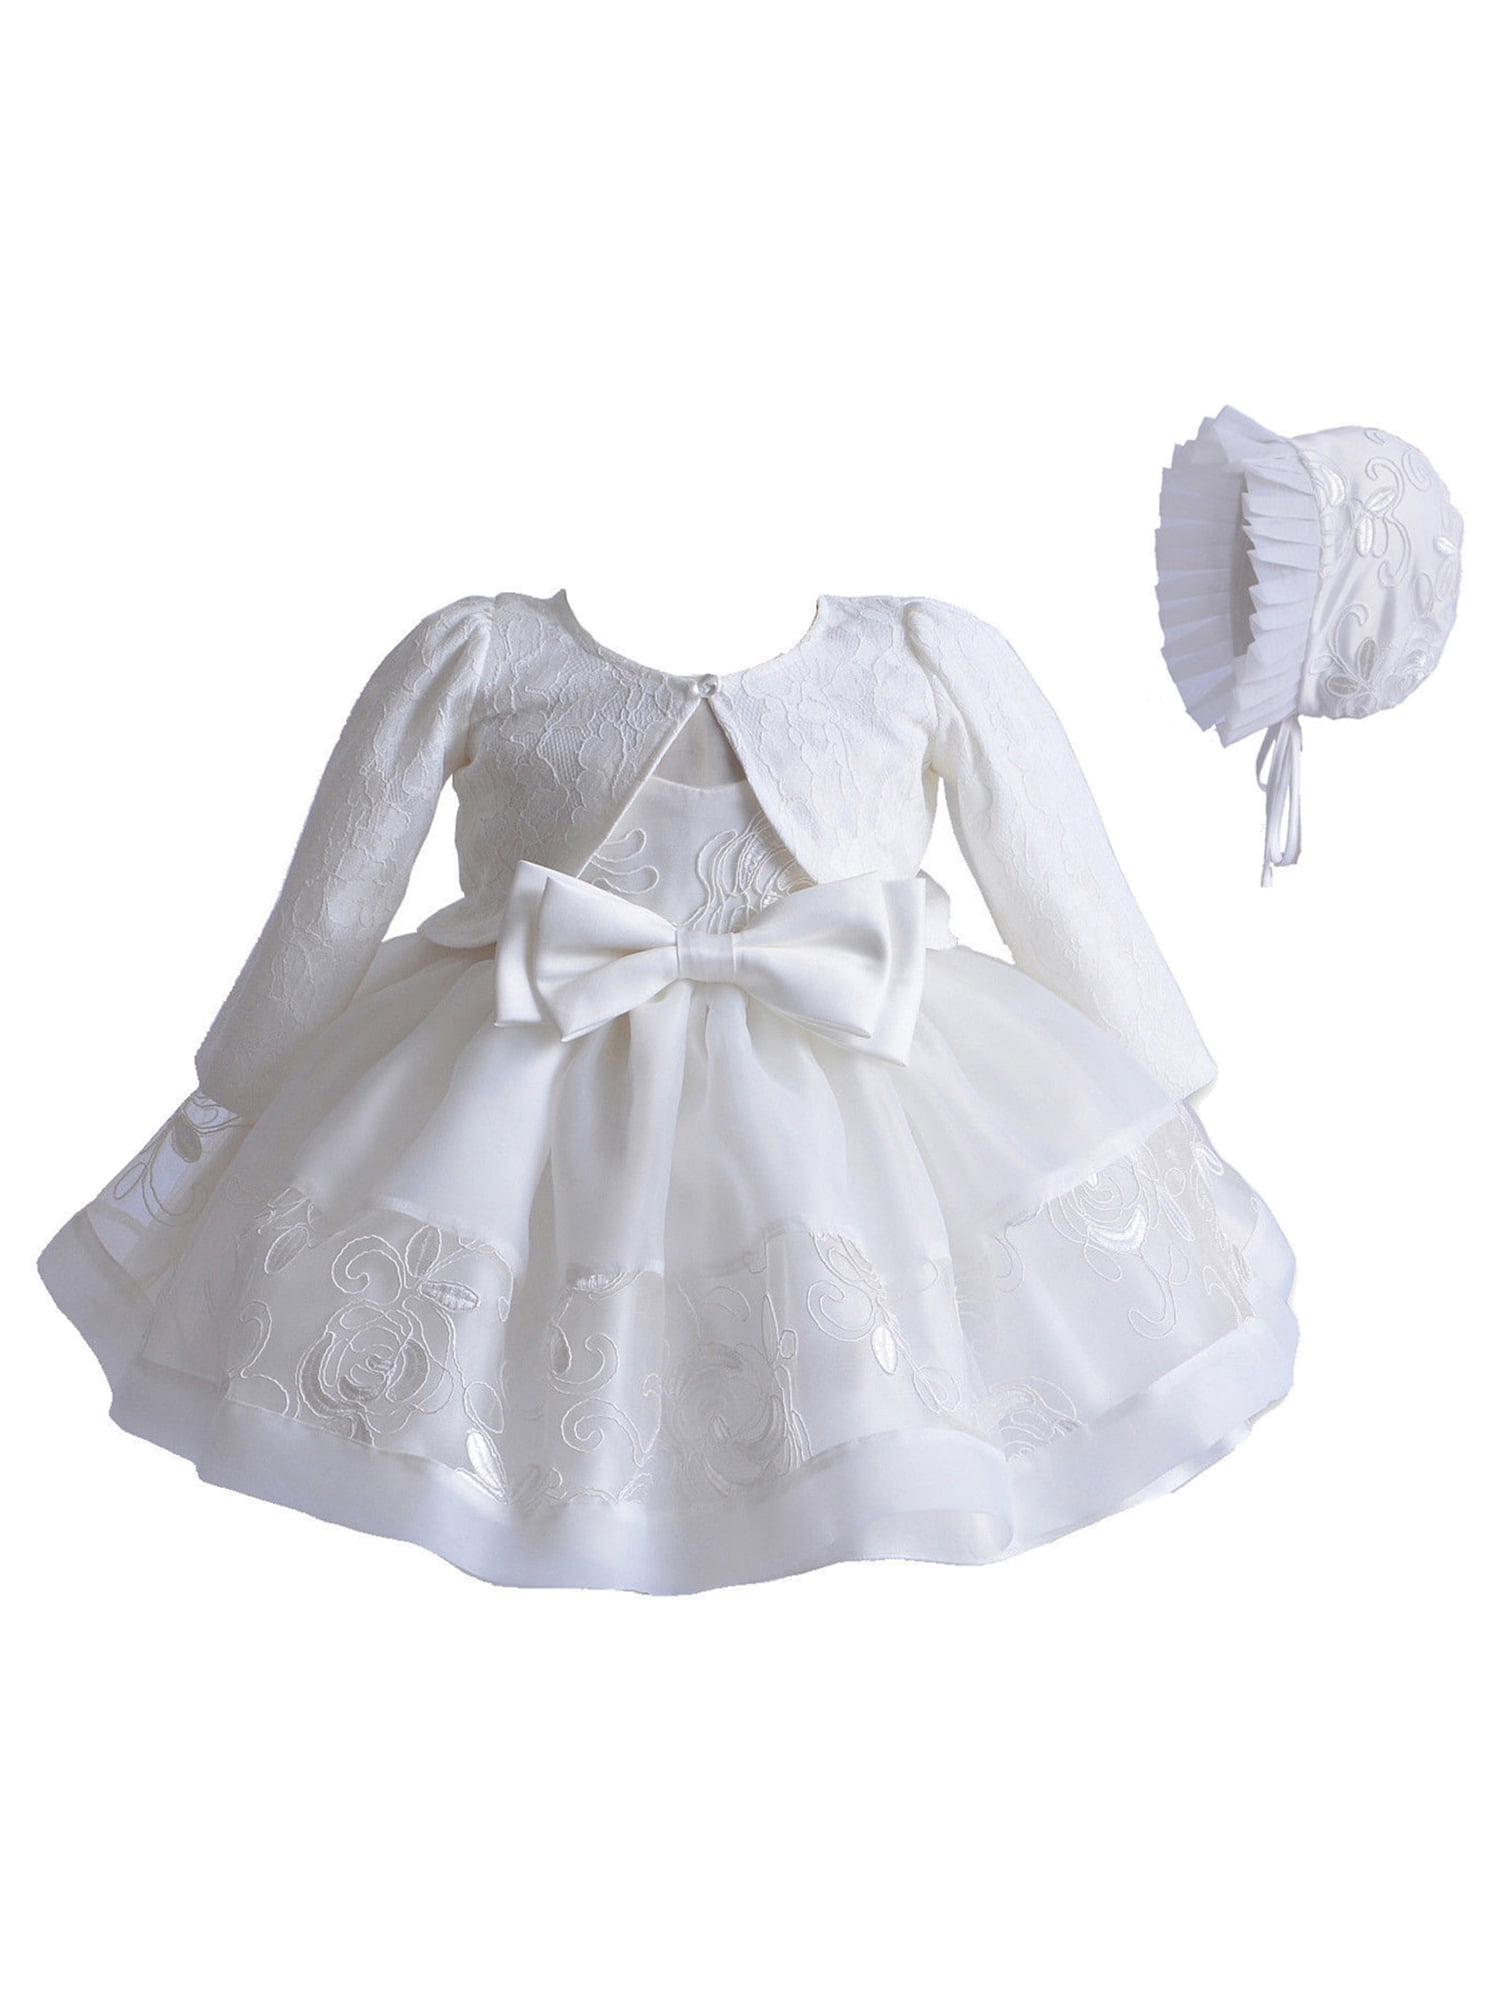 Christening Dress Party Dress with Shoes Pink Lilac White 0 3 6 9 12 18 Months 